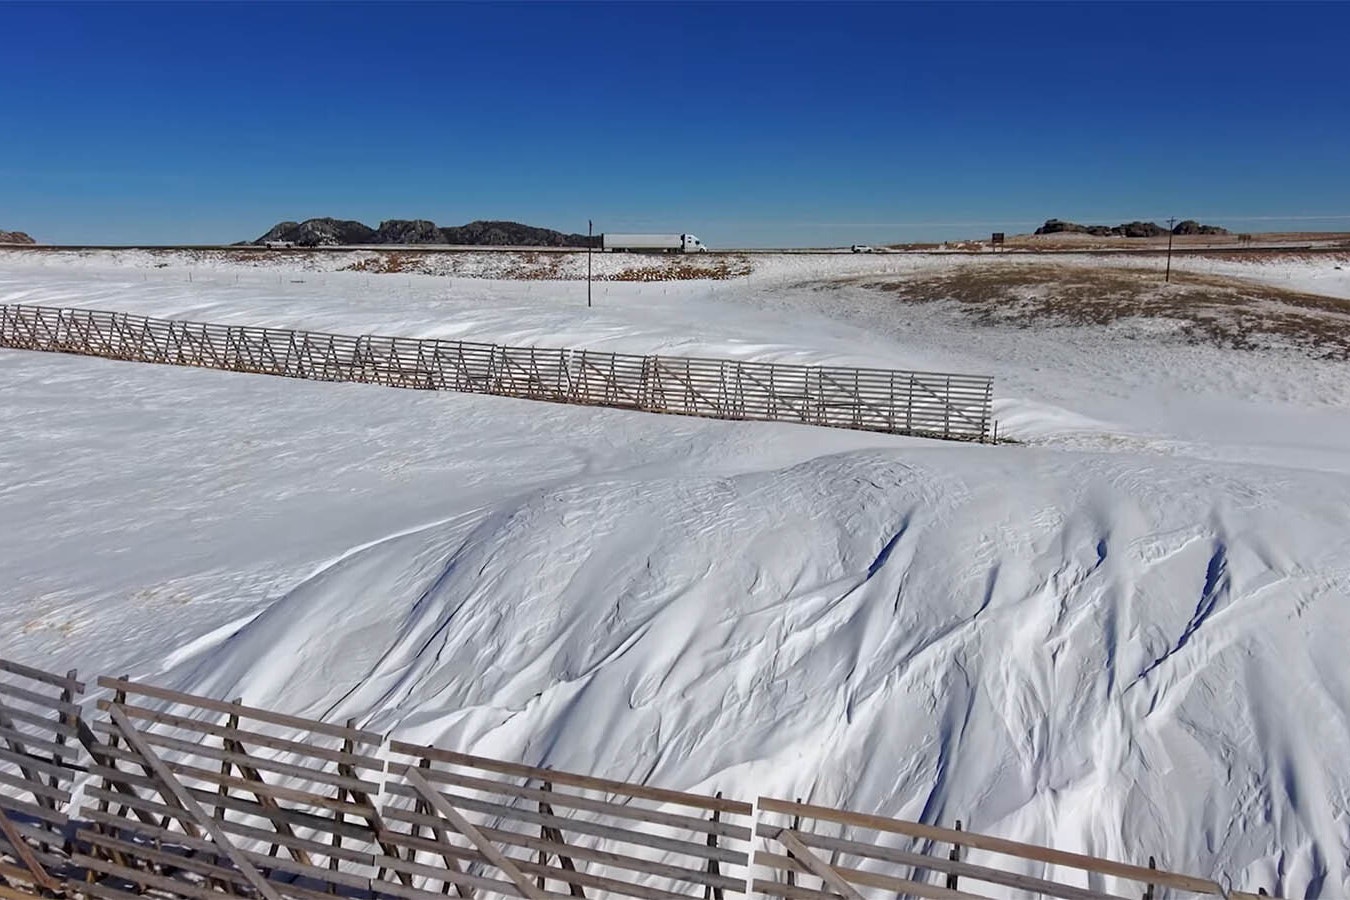 Wyoming's unique winters with its cold, wind and blowing snow, have led to the development of scientific snow mitigation measures like snow fences.